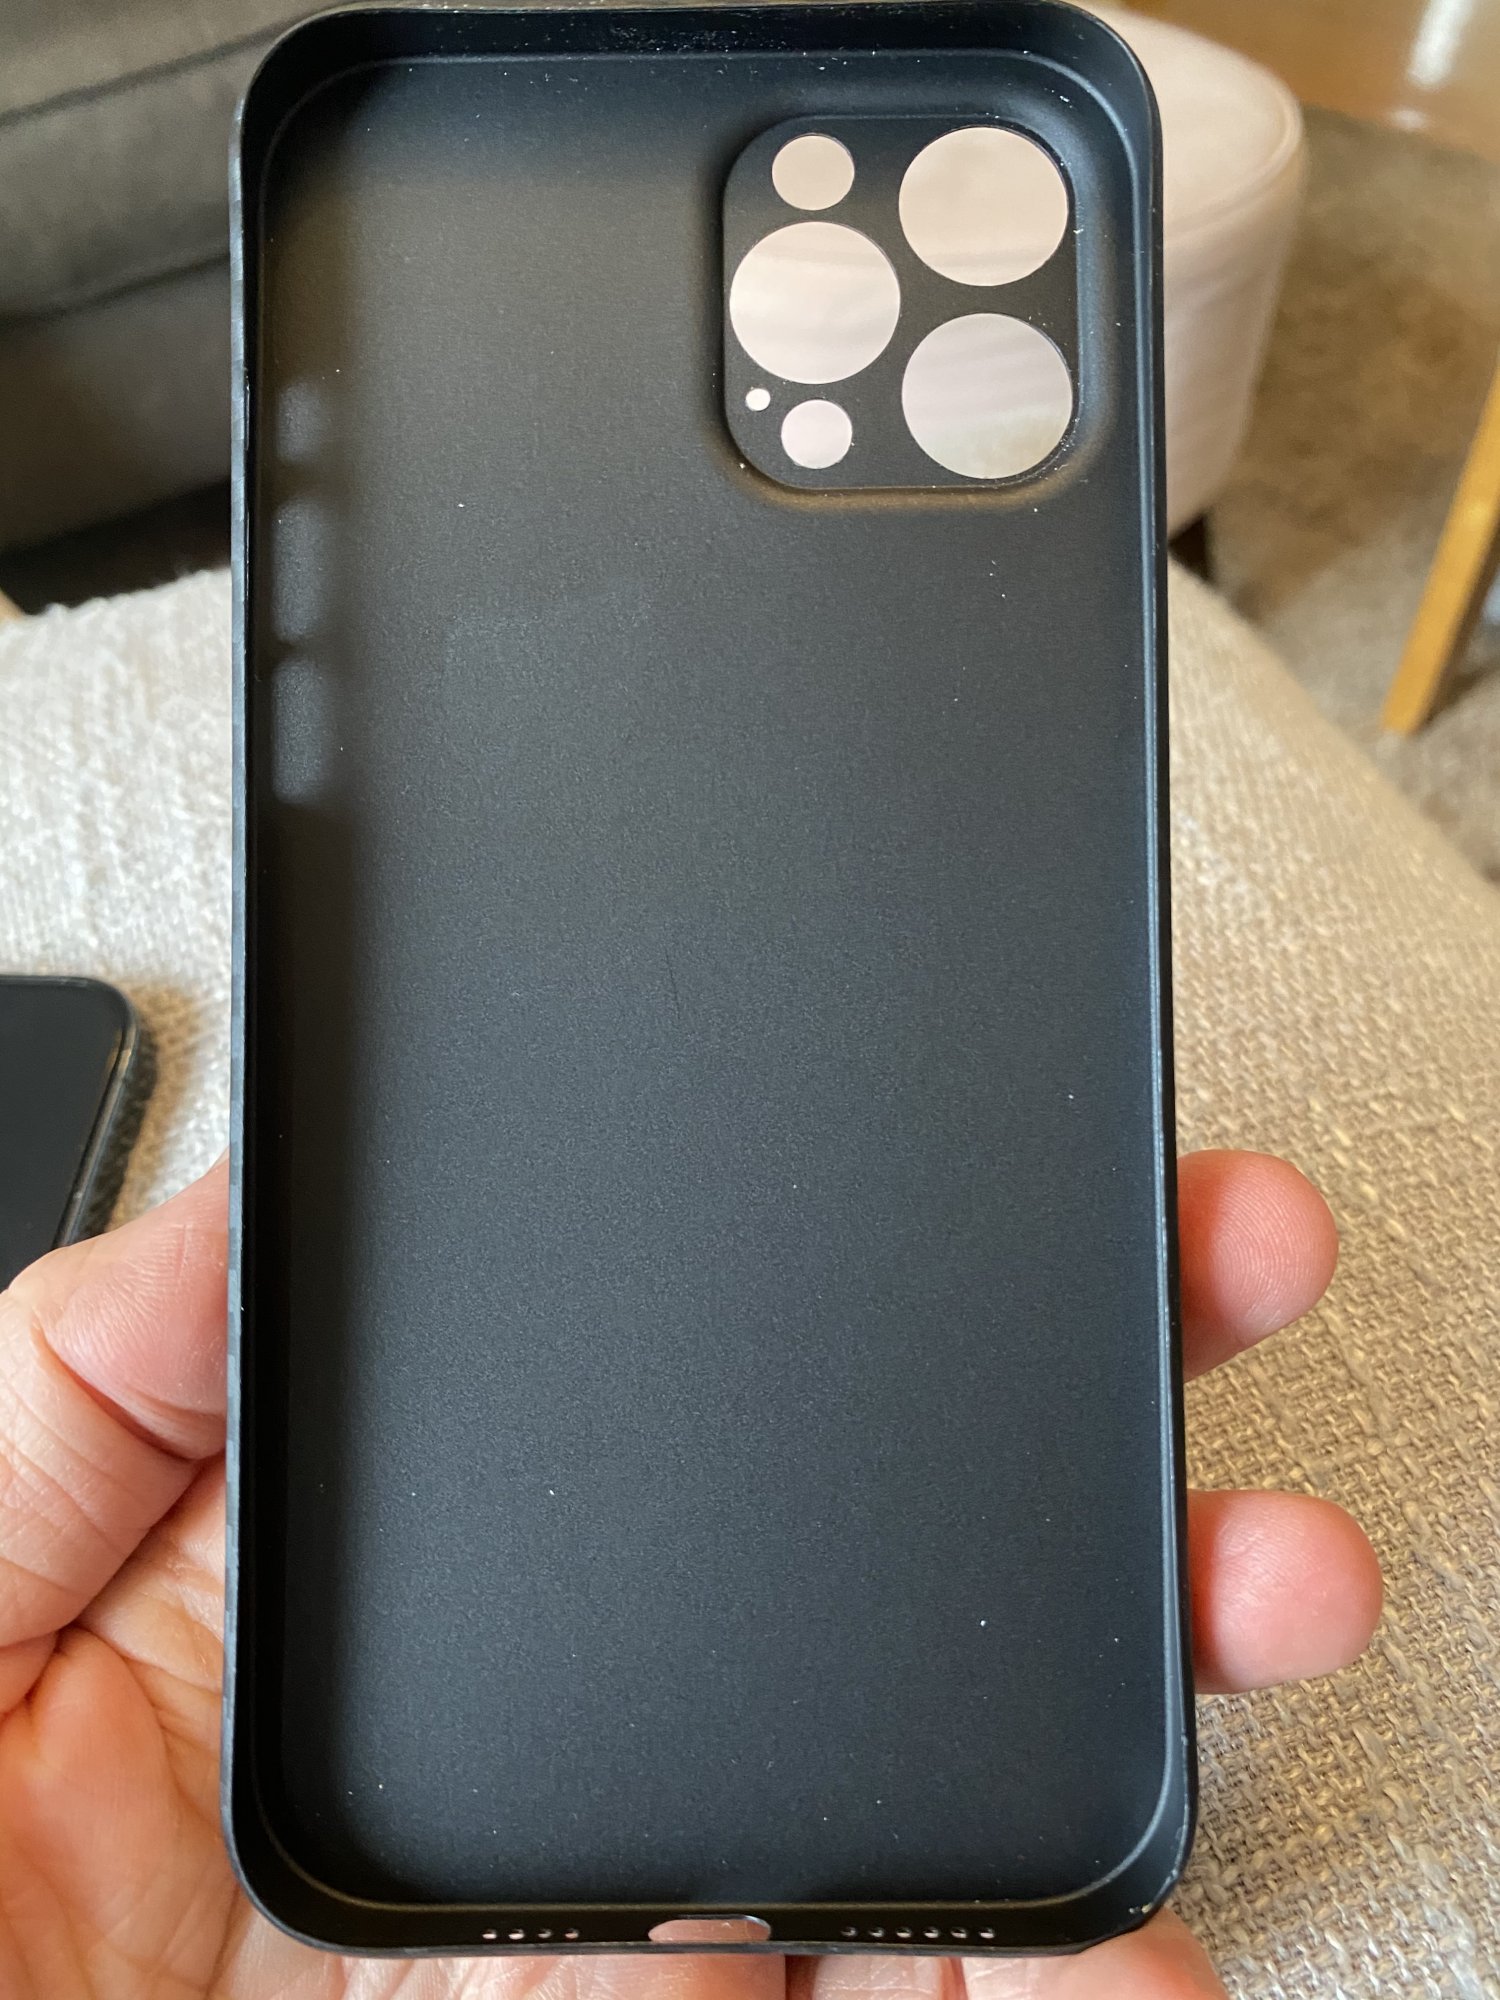 iPhone 12 Pro Max case or no case. | Page 2 | MacRumors Forums